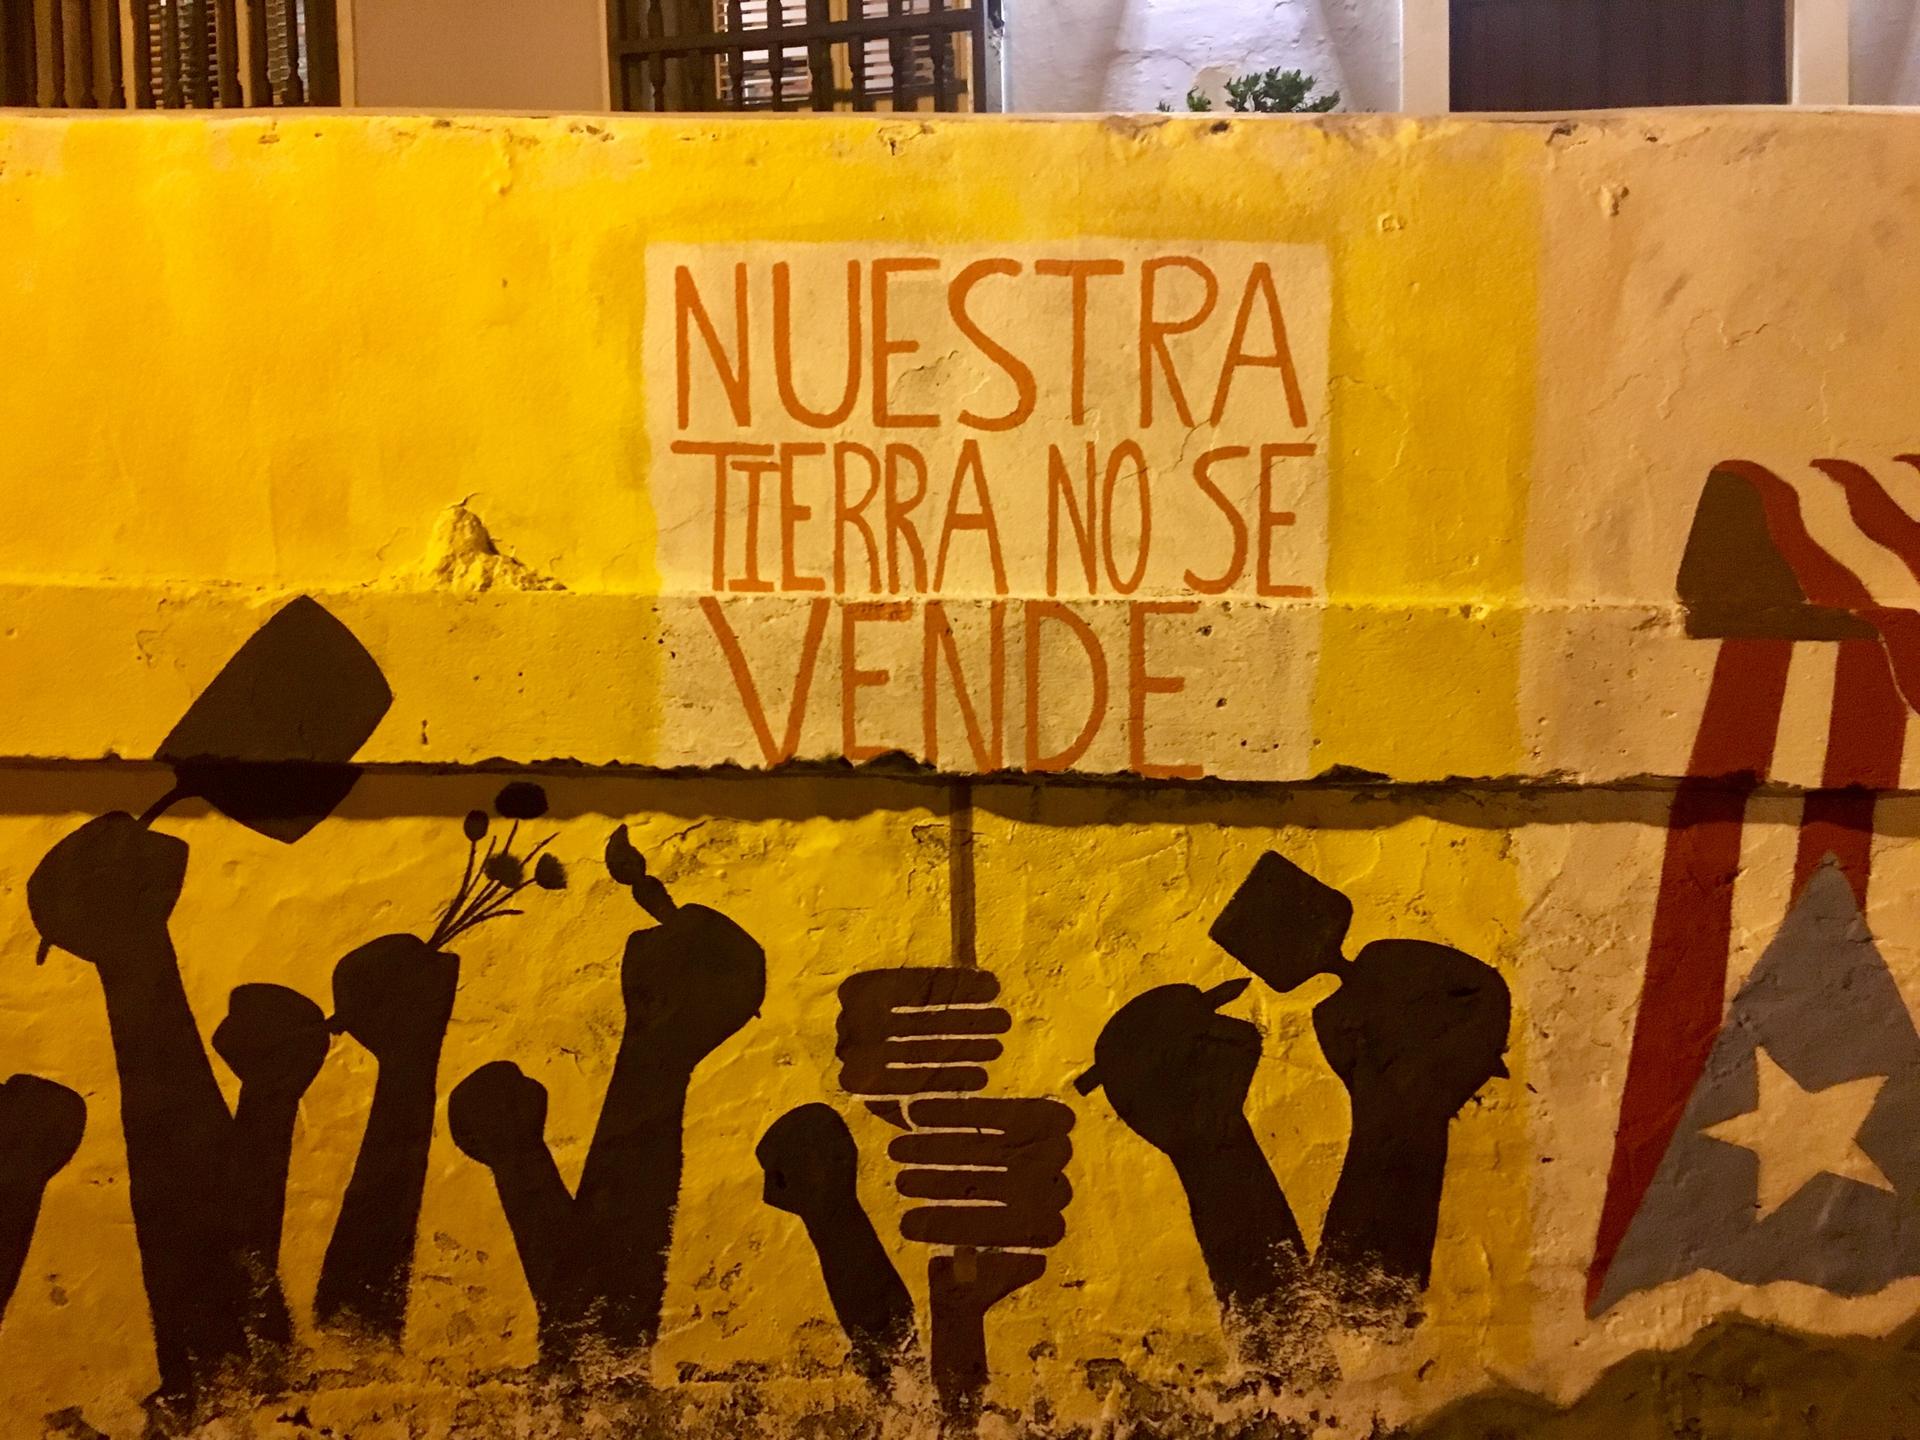 Our land is not for sale painted on a wall in Spanish with yellow paint